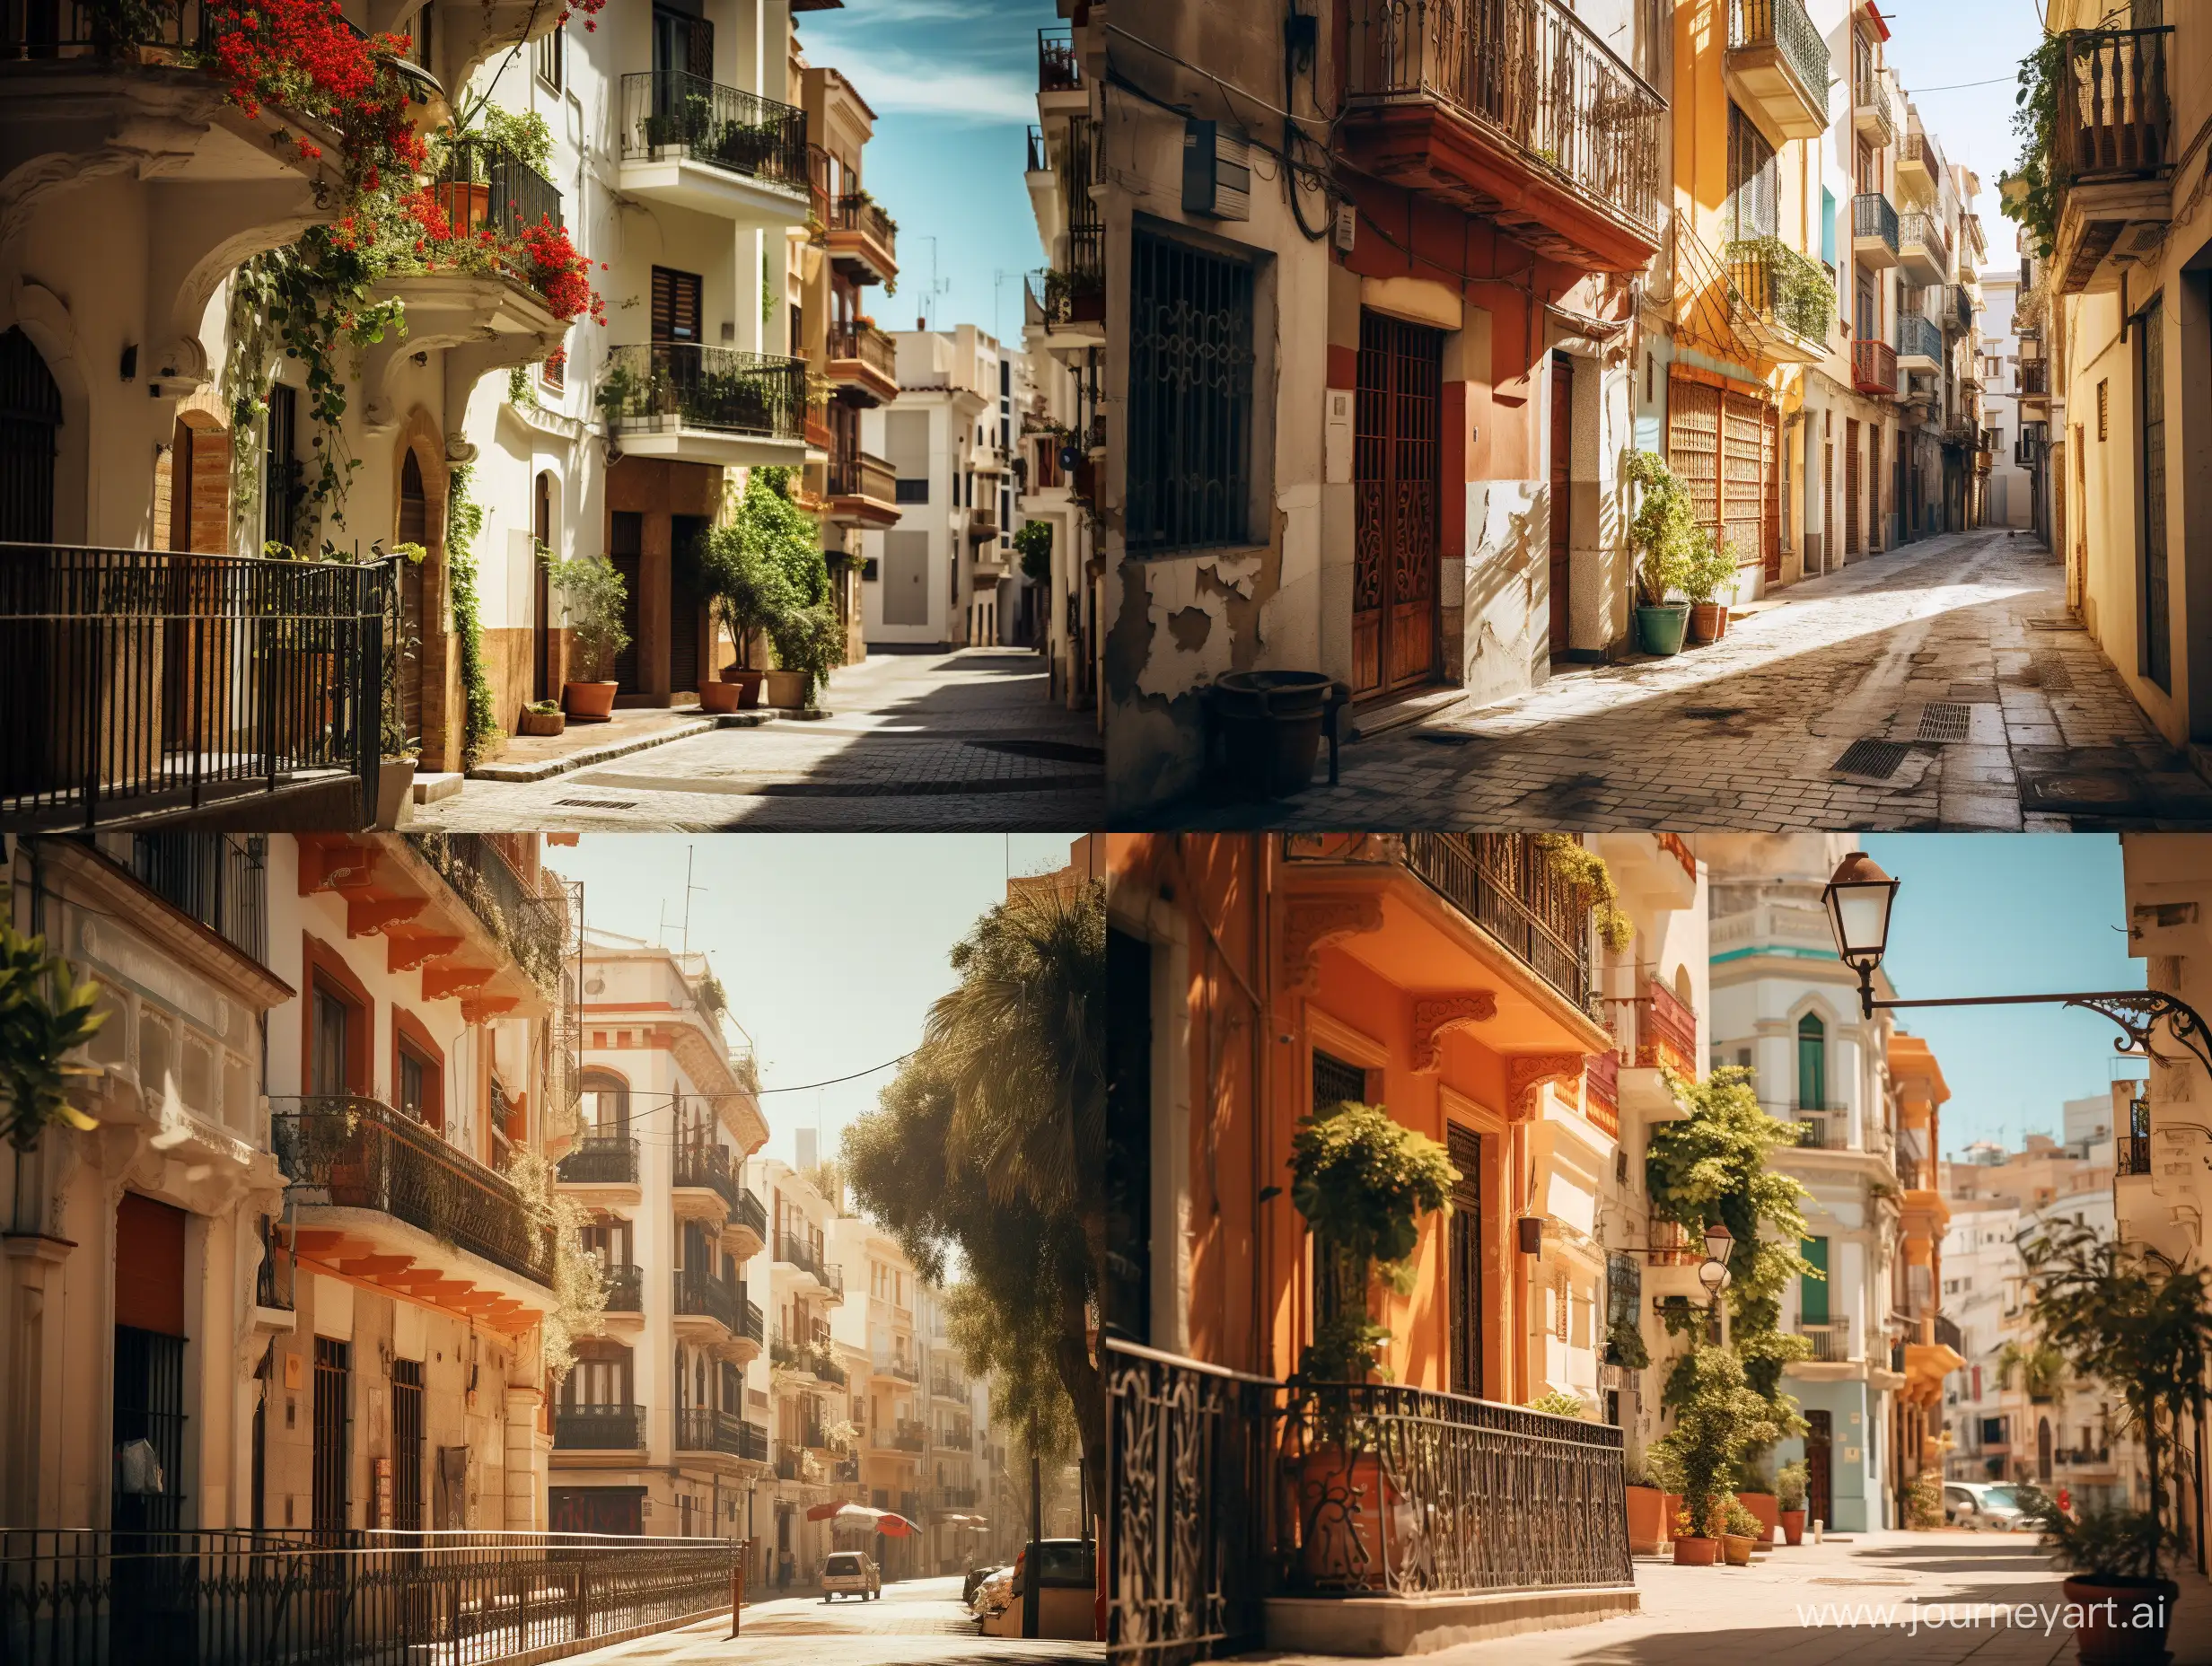 Sunny-Afternoon-in-Malagas-Old-Town-Captured-with-a-Fujifilm-Camera